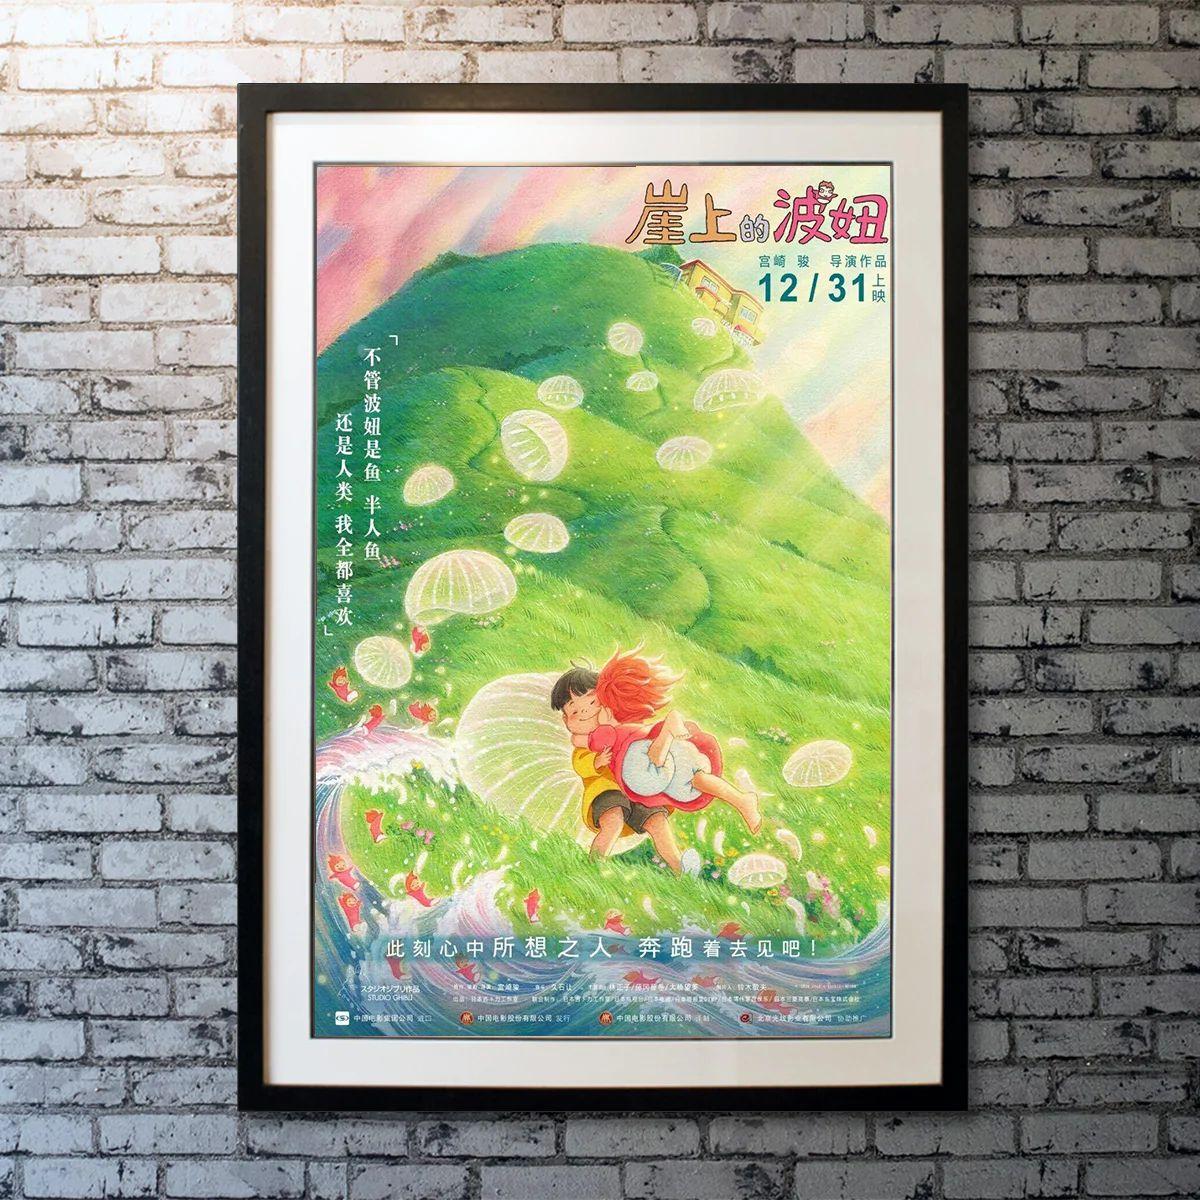 Ponyo, Unframed Poster, 2020R

Original Chinese One Sheet (29 X 41 Inches). A five-year-old boy develops a relationship with Ponyo, a young goldfish princess who longs to become a human after falling in love with him.

Year: 2020